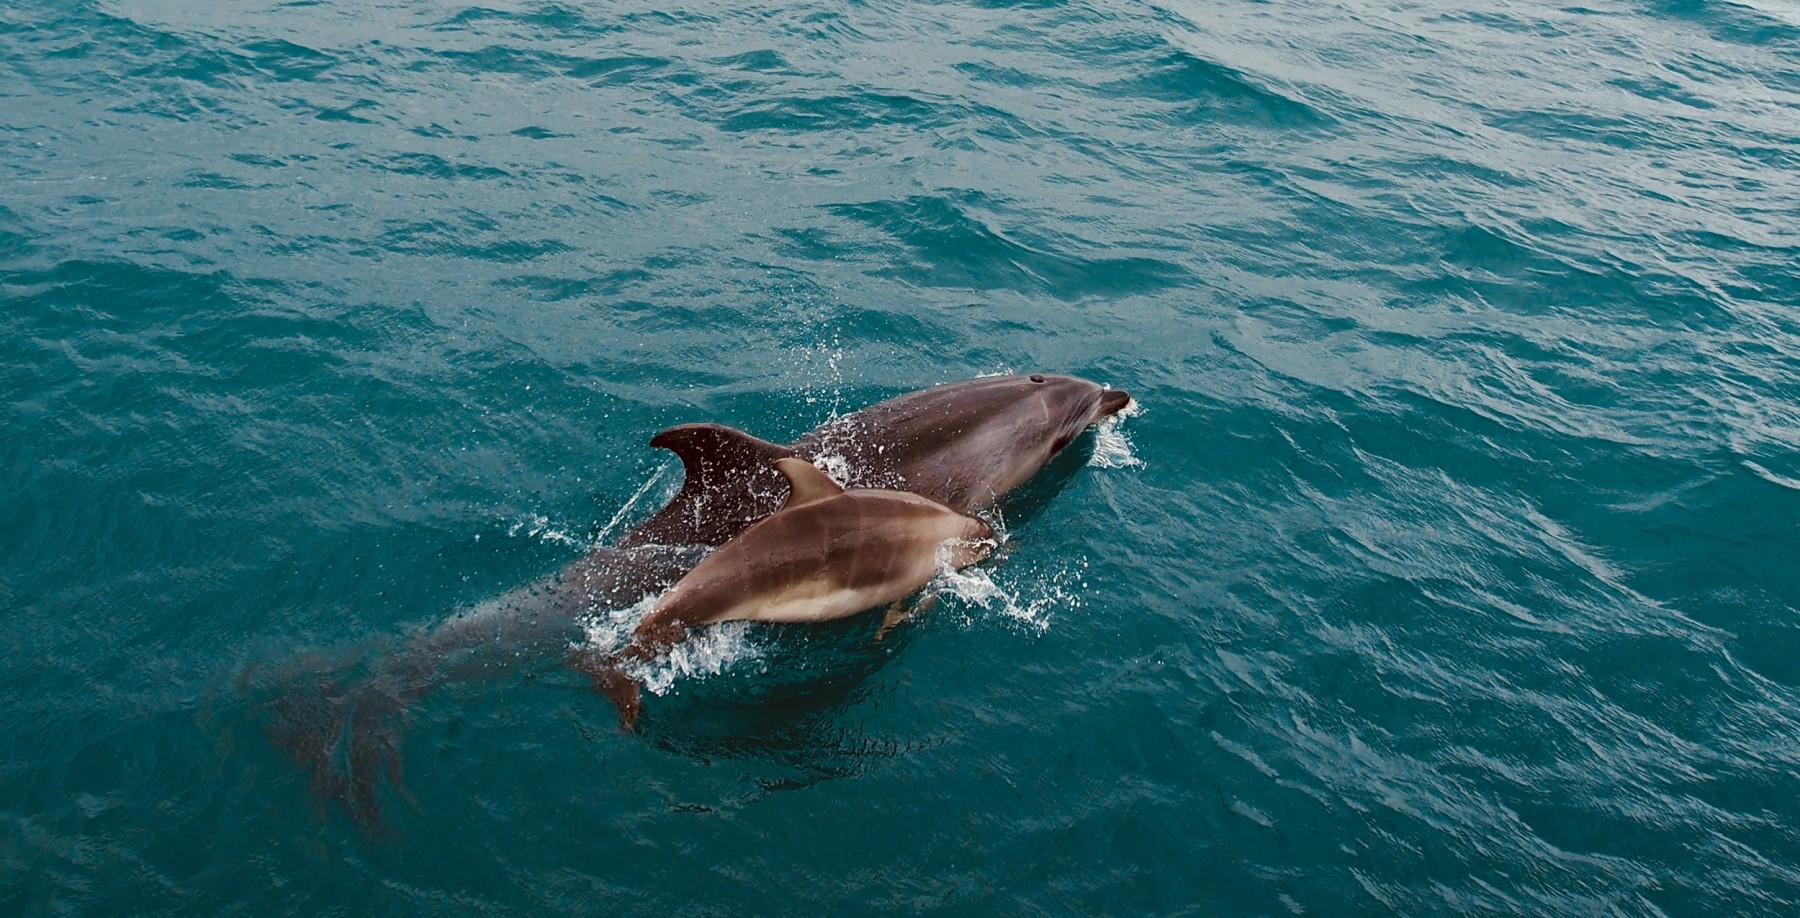 Several wild dolphins swimming in the ocean - photo by Adrien Aletti